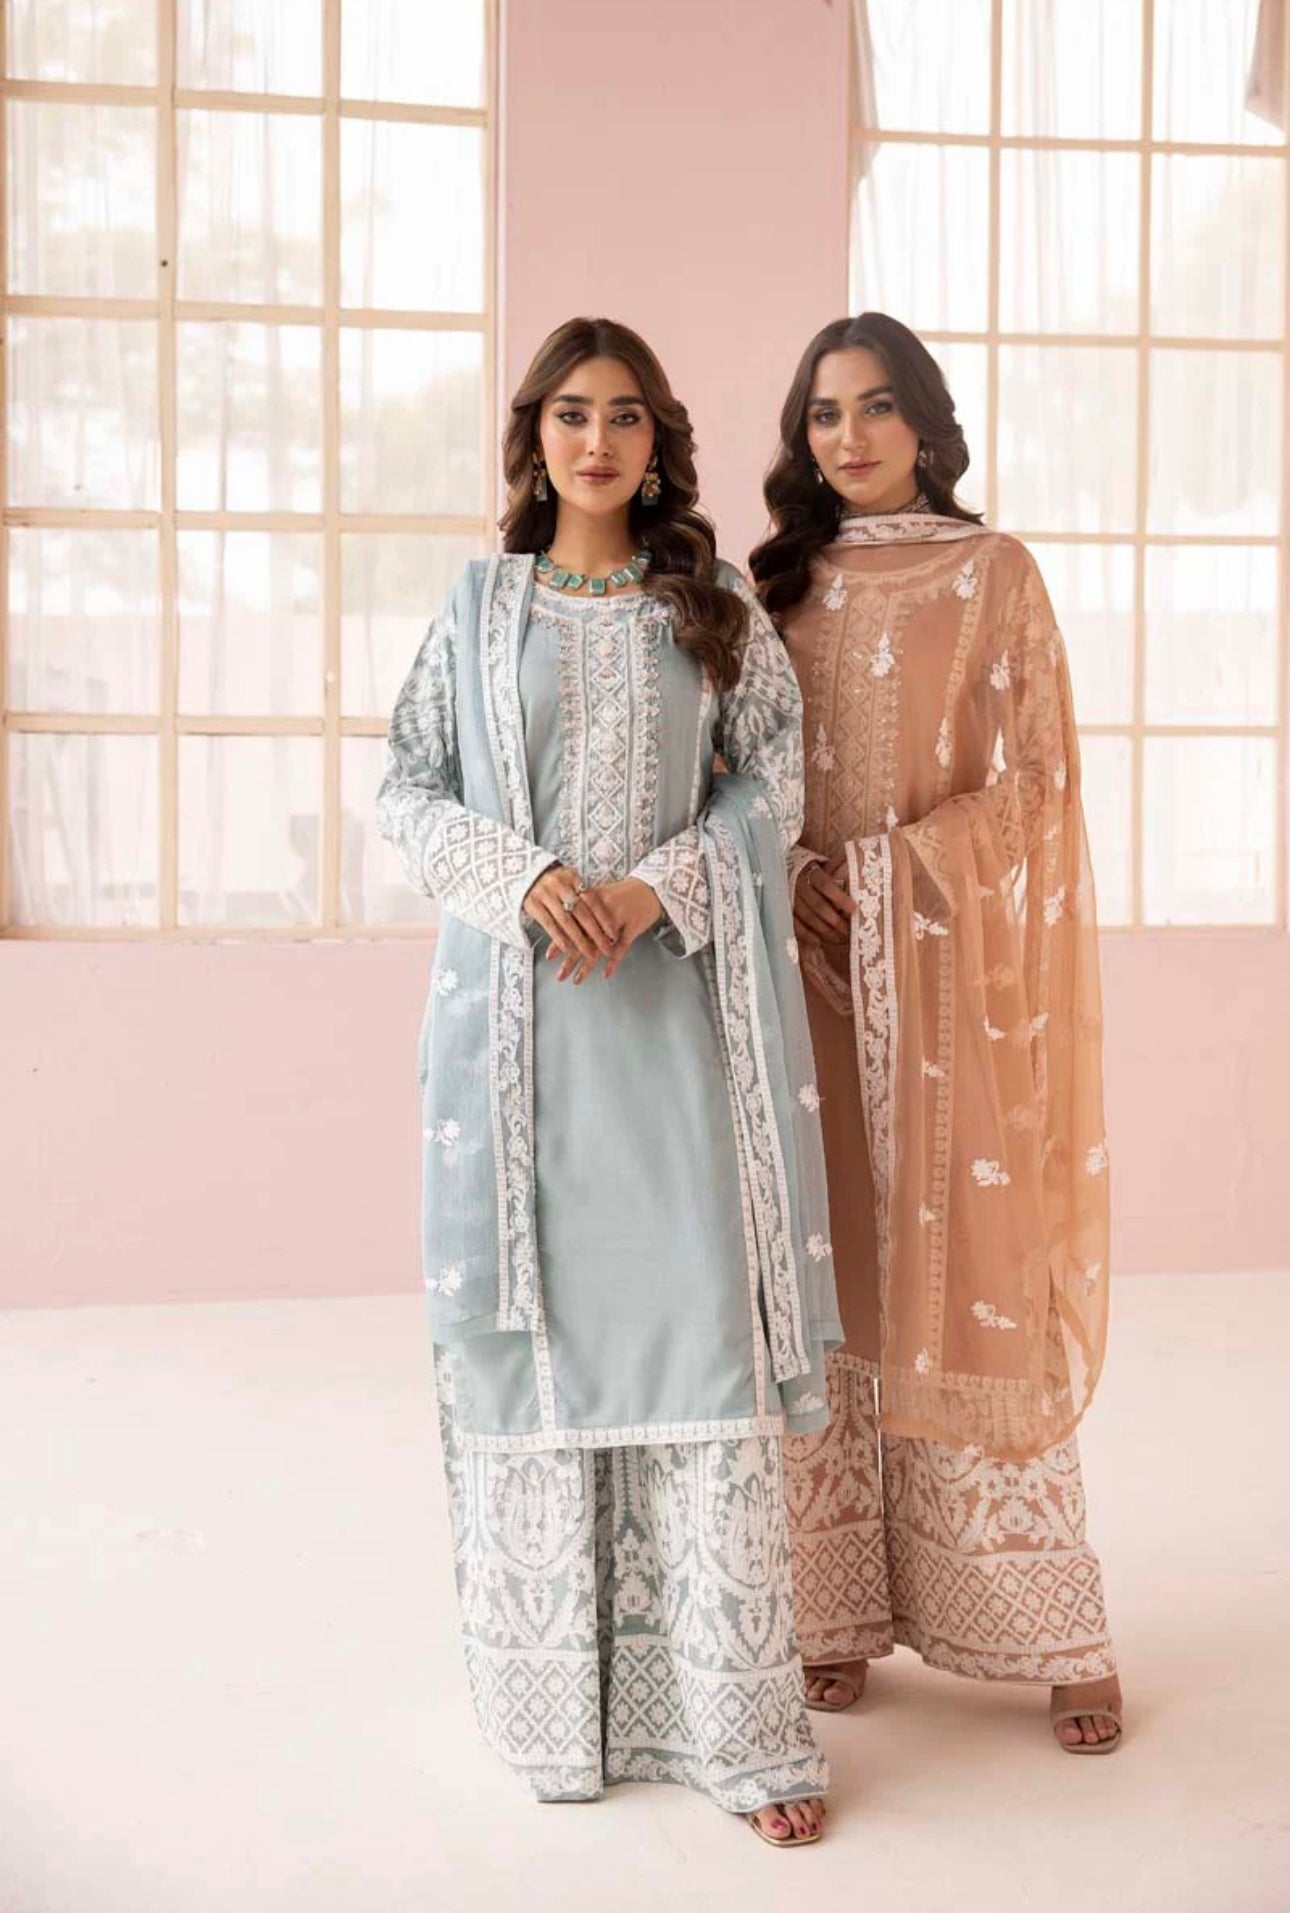 SIMRANS Fiza Mint Embroidered Eid 3 Piece Suit With Chiffon Dupatta